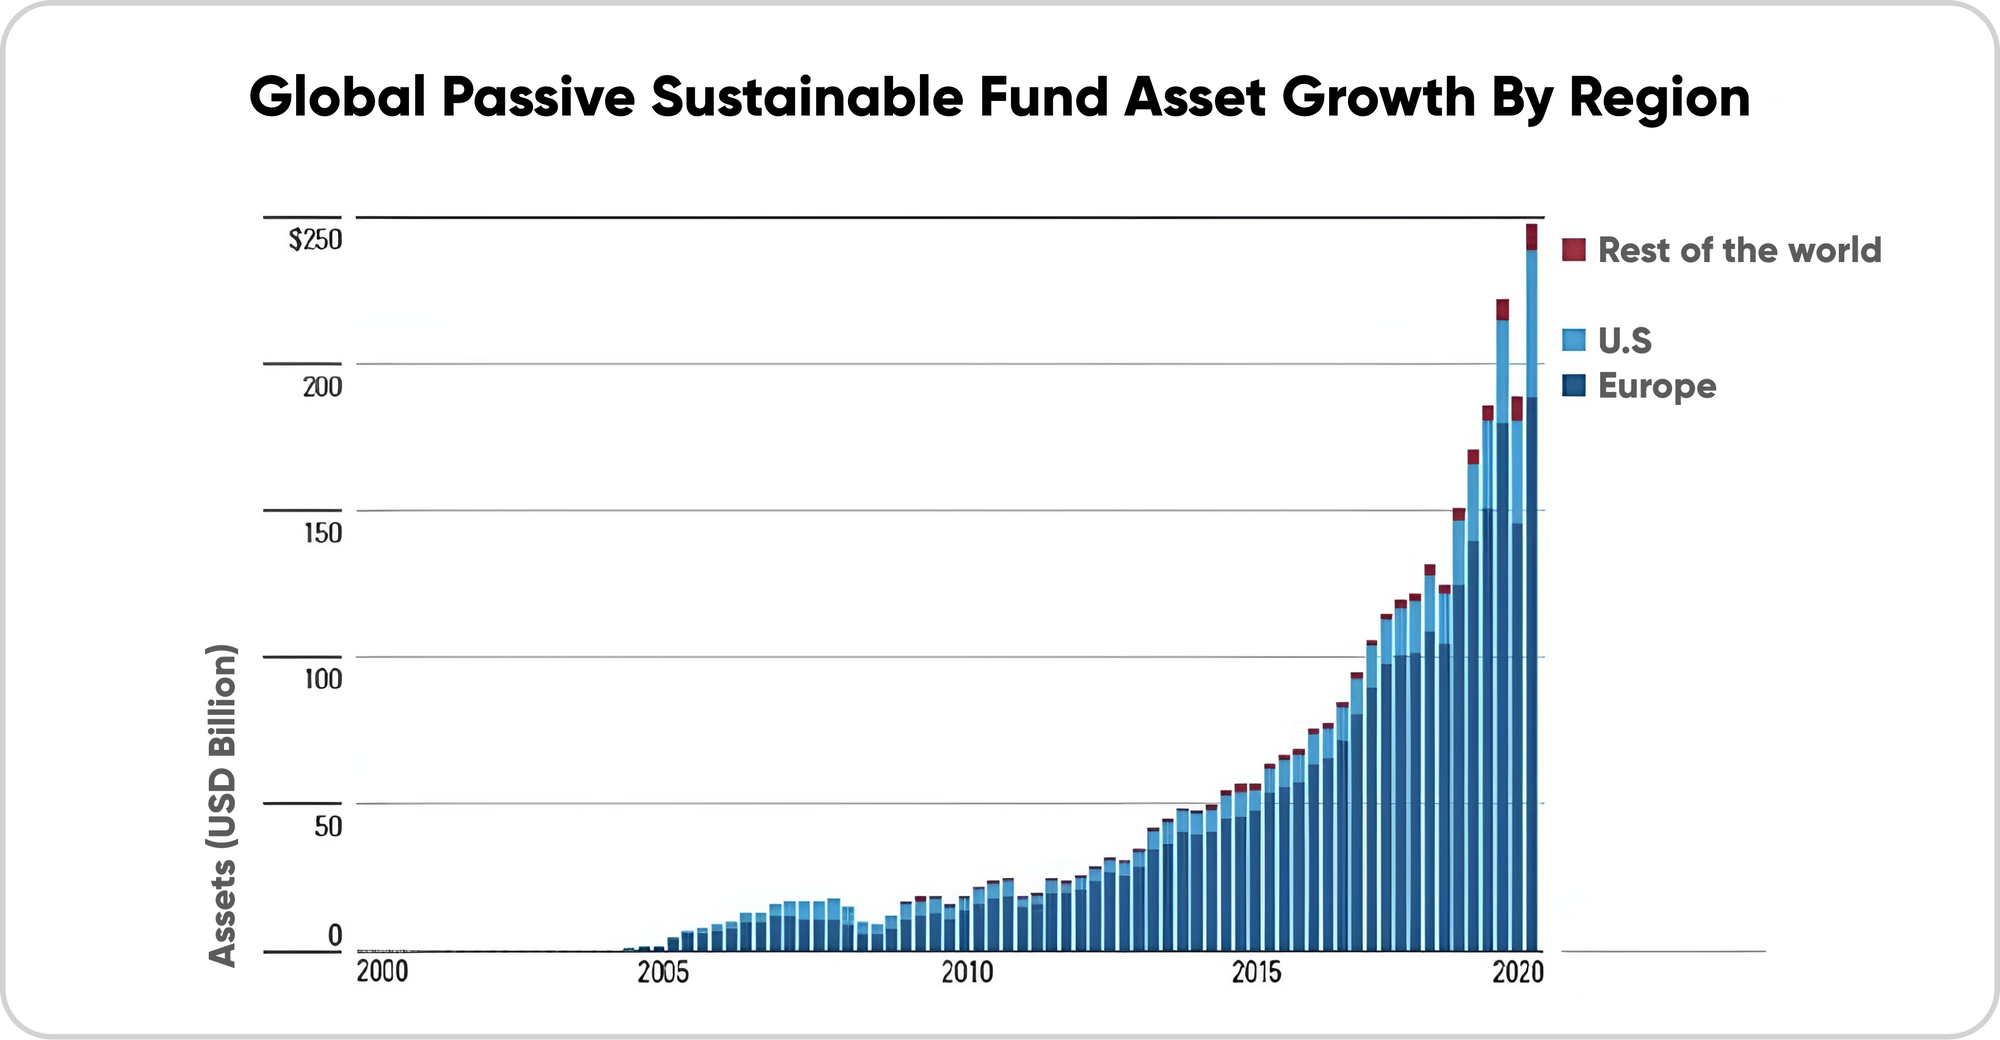 Global Passive Sustainable Fund Asset Growth by Region